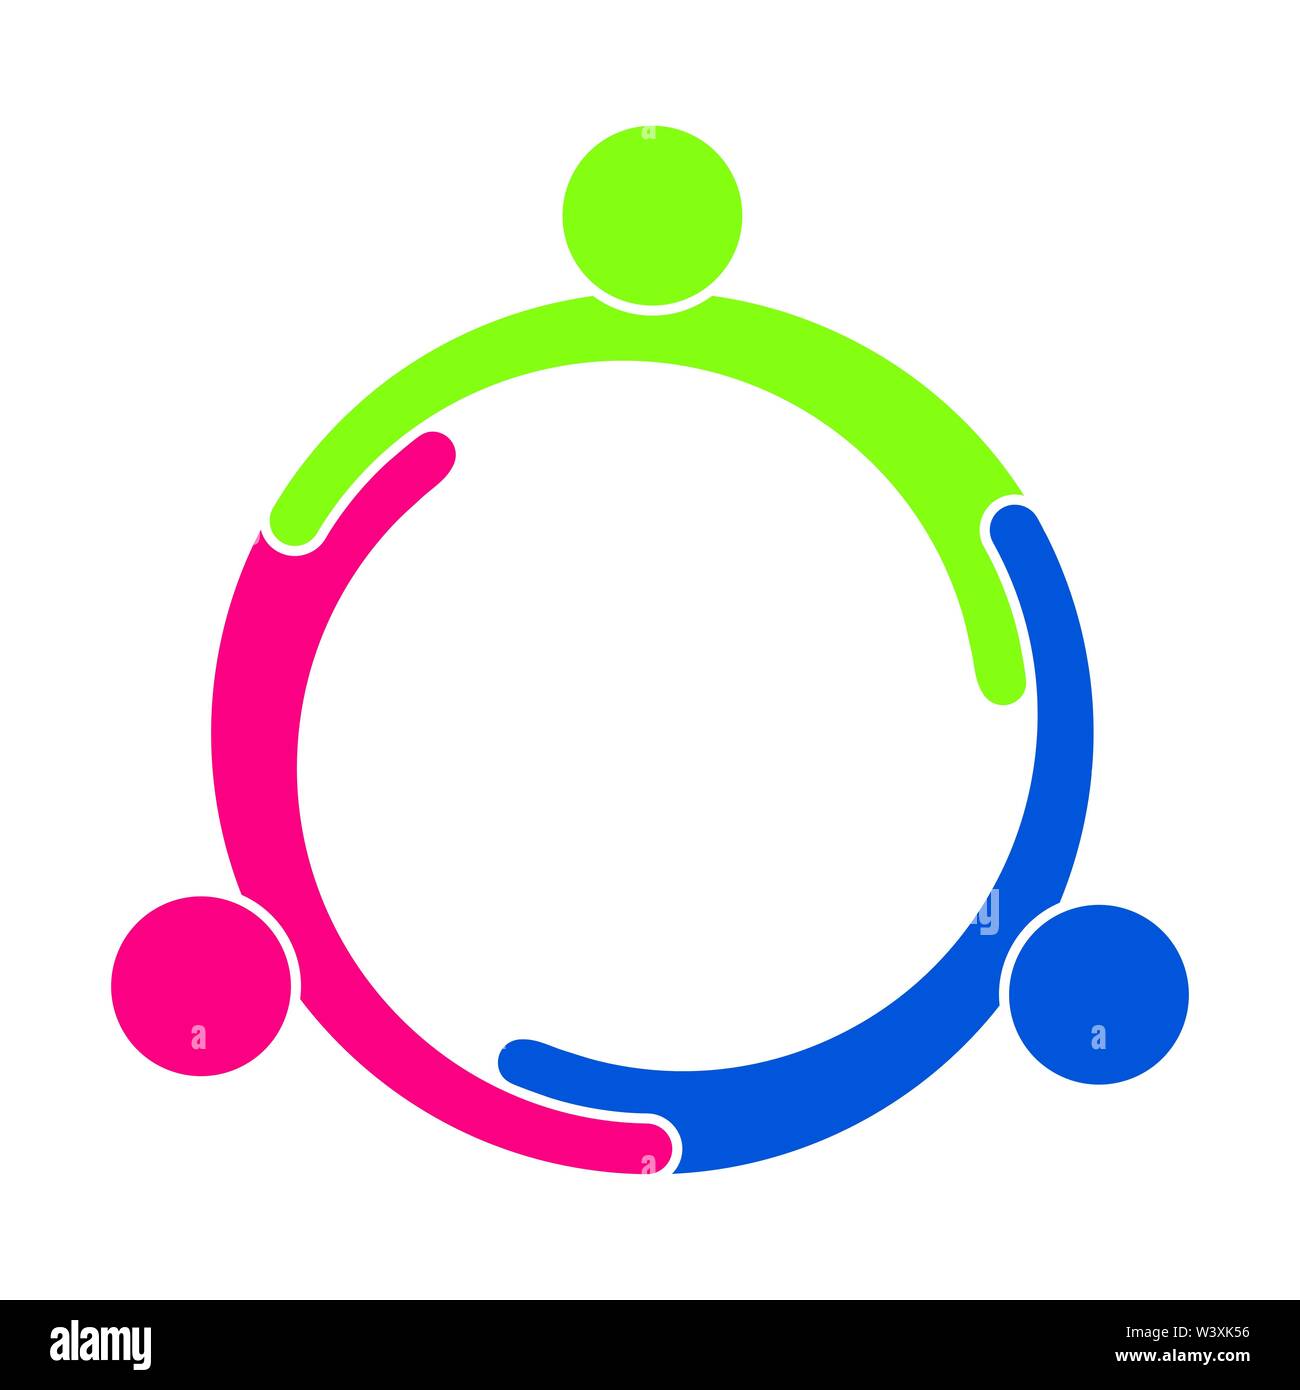 Teamwork. A group of three people form a circle. Stock Vector